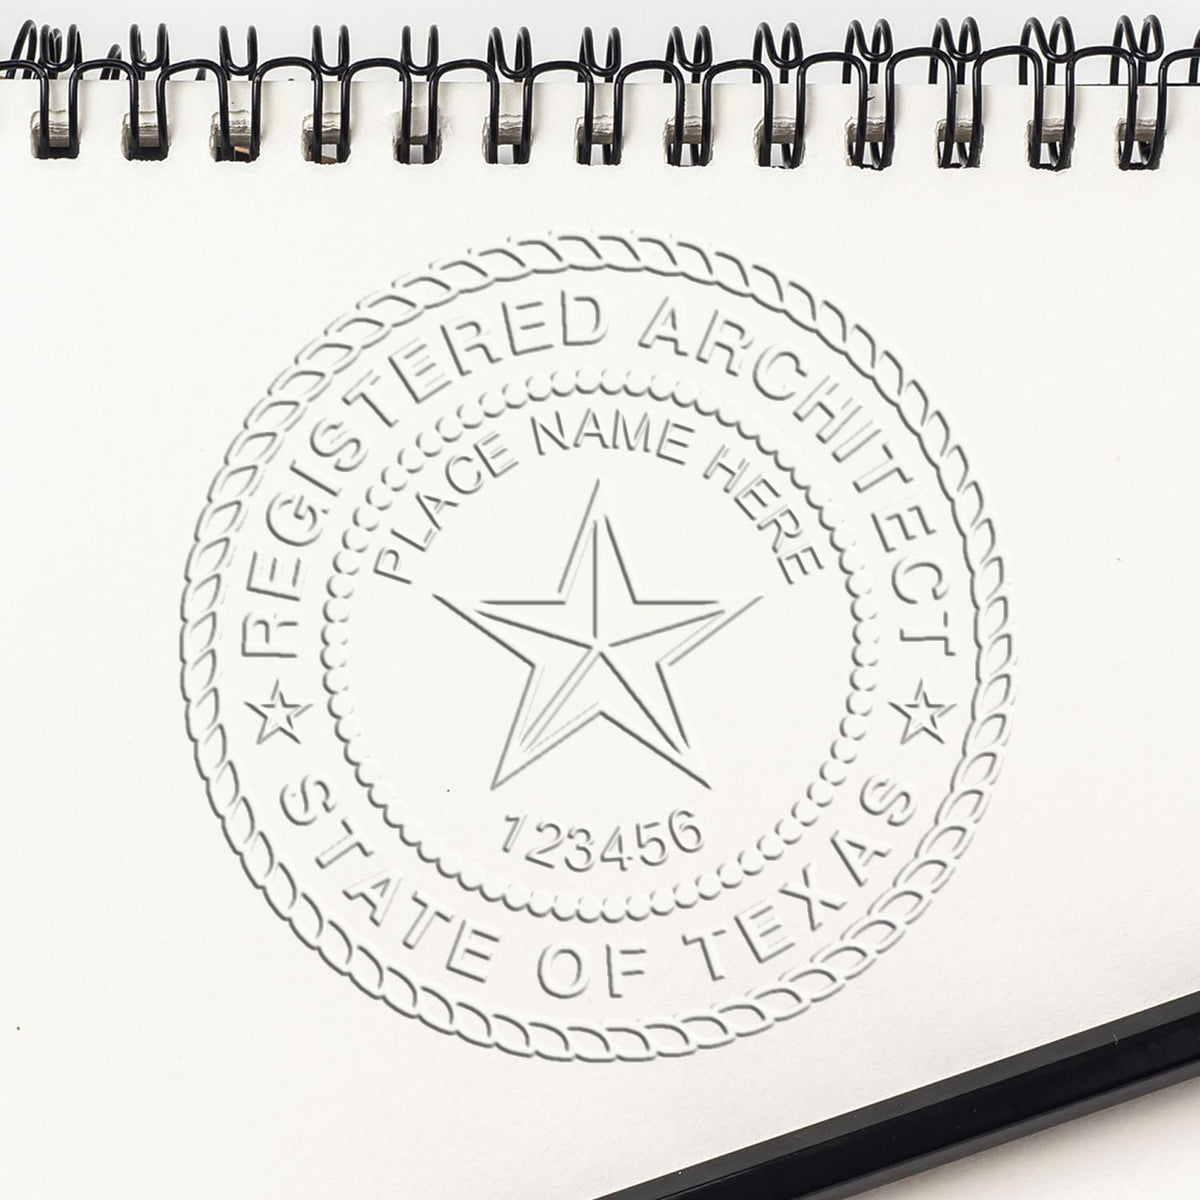 The Gift Texas Architect Seal stamp impression comes to life with a crisp, detailed image stamped on paper - showcasing true professional quality.